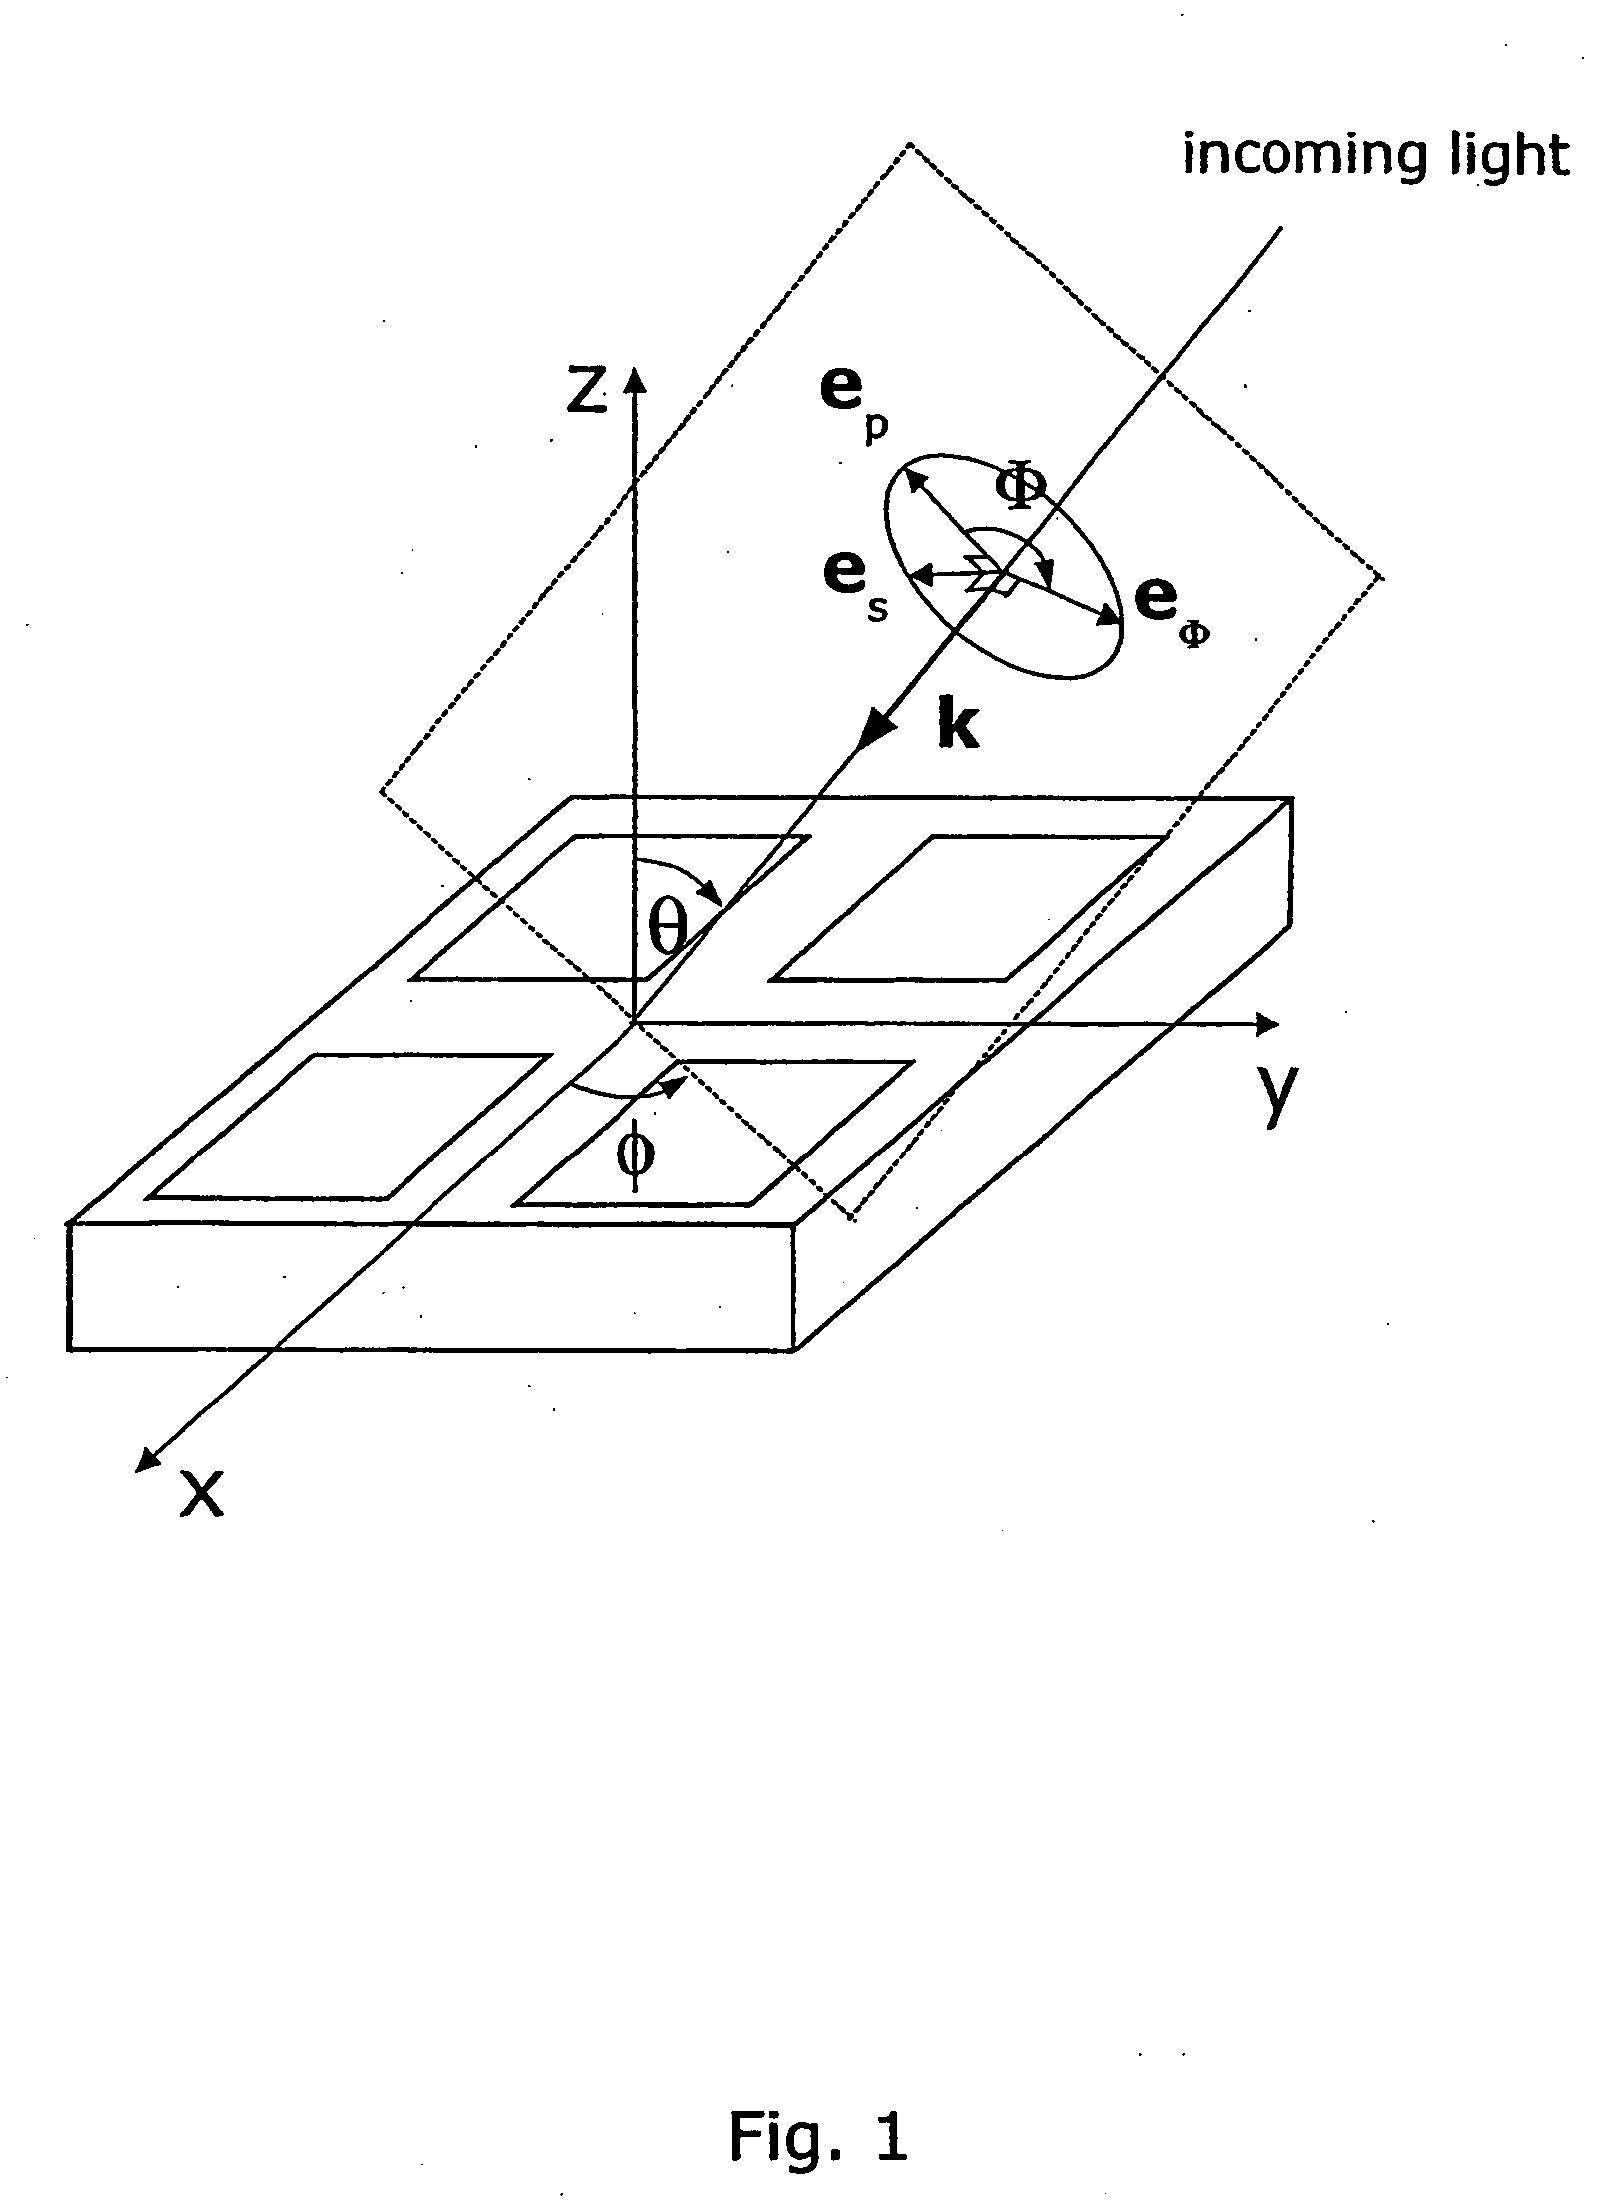 Method and apparatus for optically measuring the topography of nearly planar periodic structures